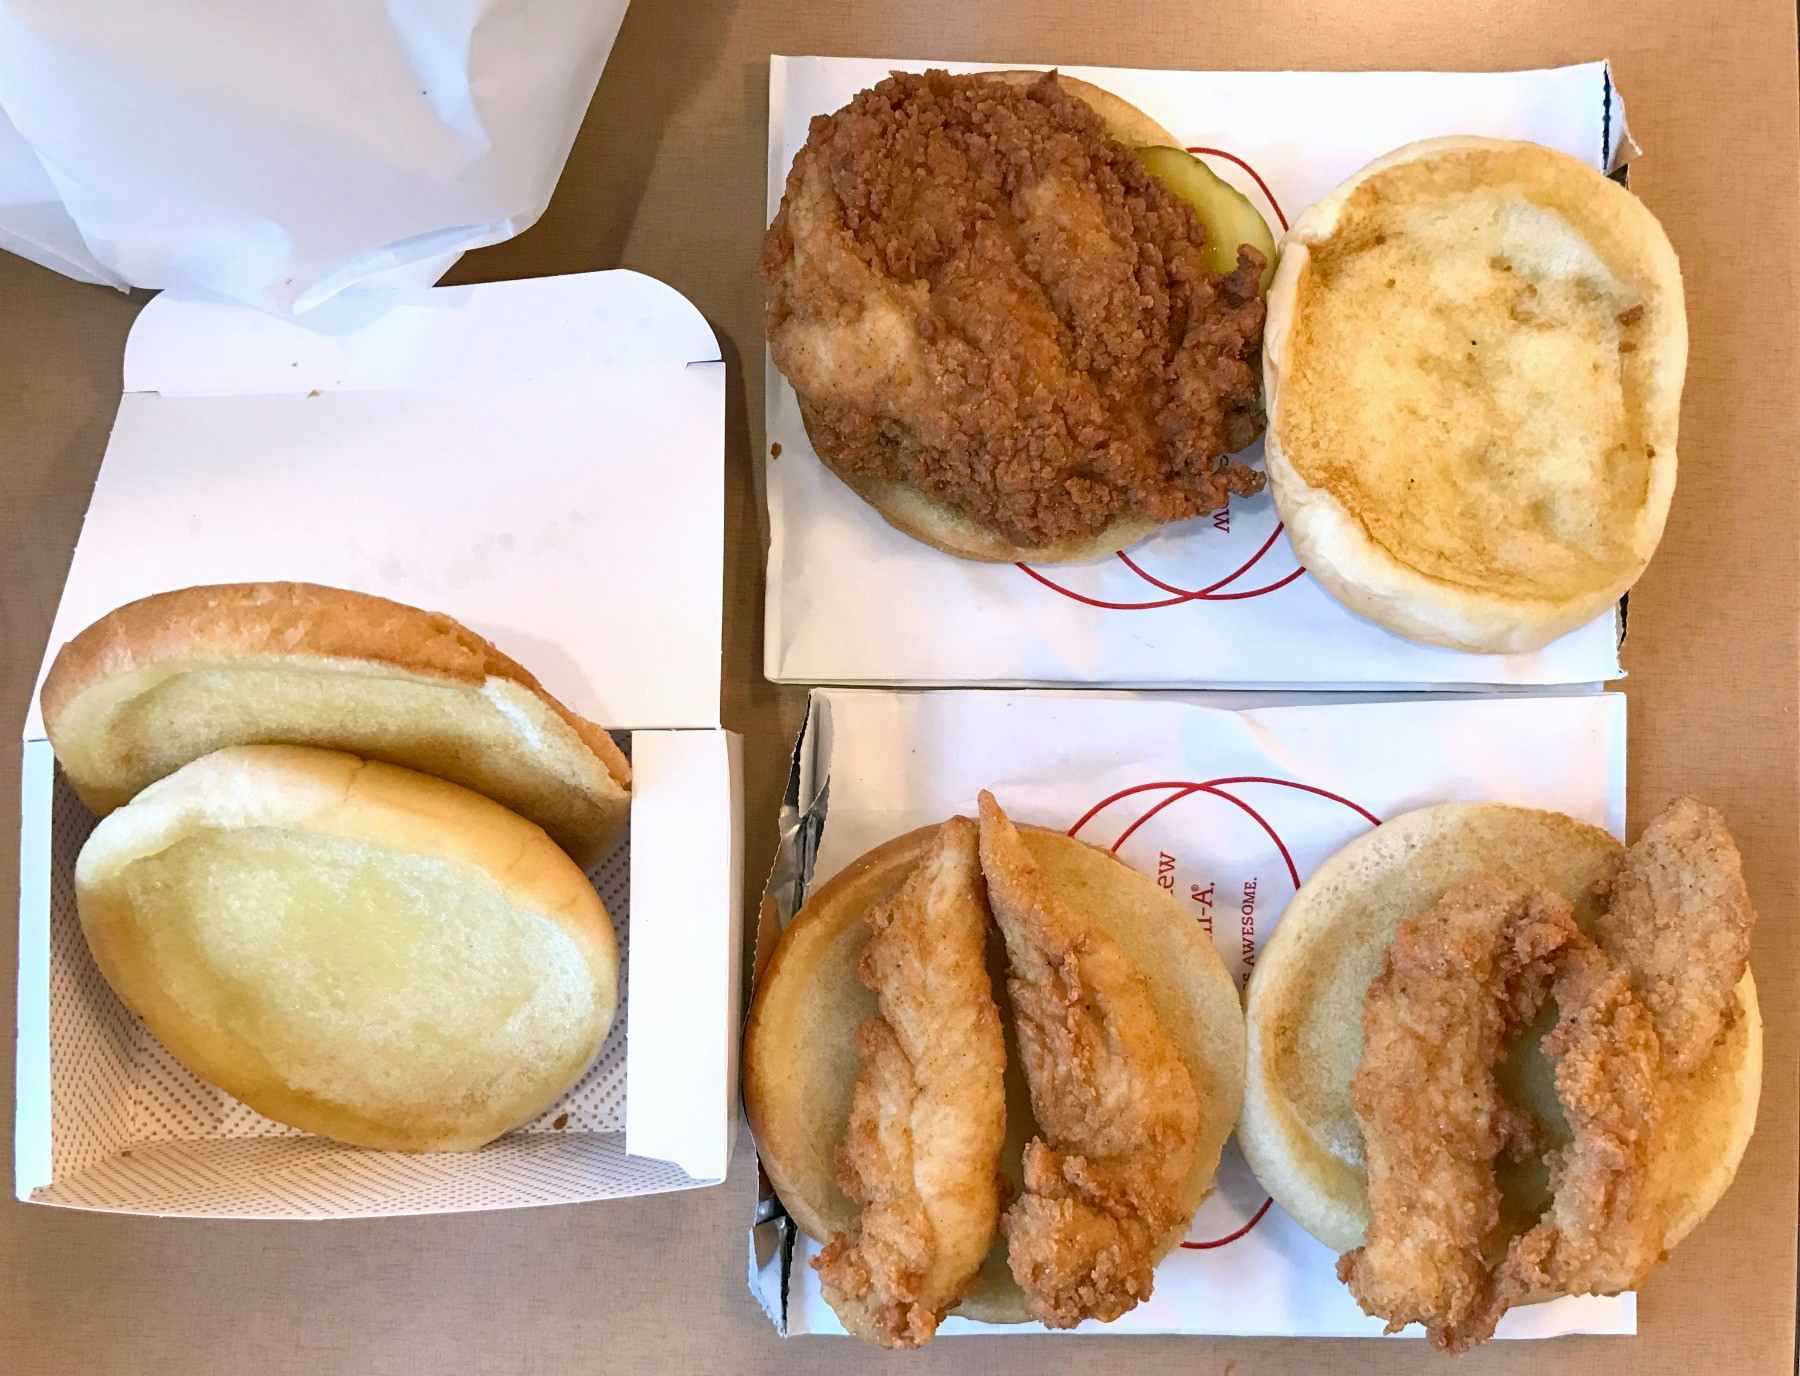 A Chick-fil-A chicken sandwich on a table next to some buns with Chick-fil-A chicken tenders on them.